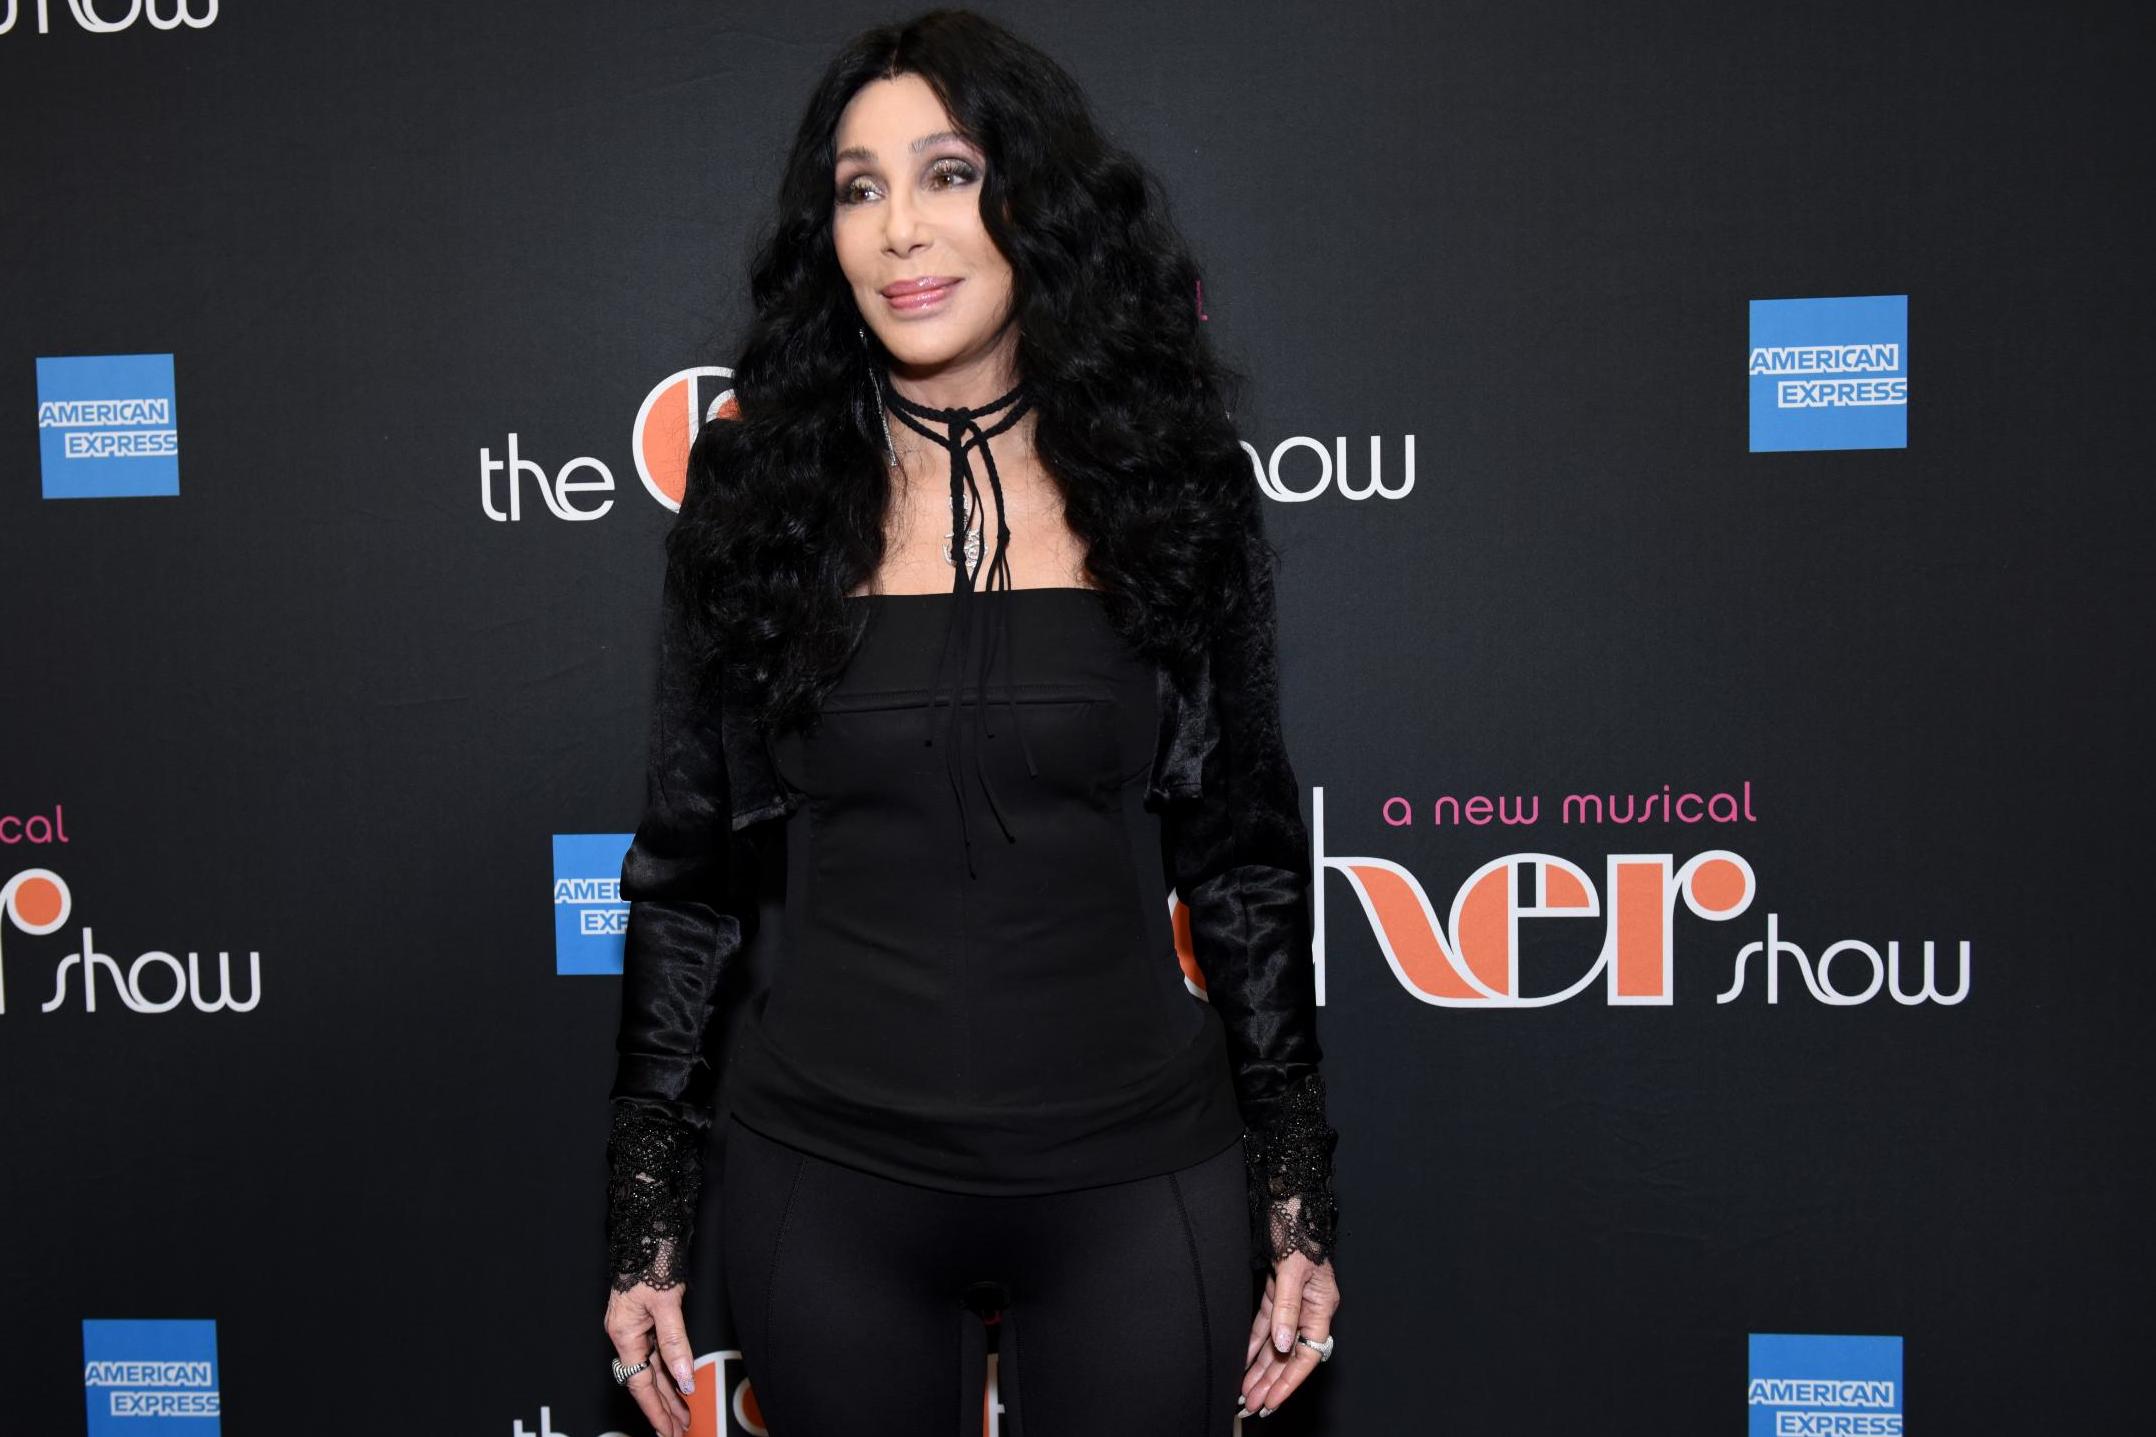 Cher arrives at 'The Cher Show' Broadway Opening Night at Neil Simon Theatre on 3 December, 2018 in New York City.